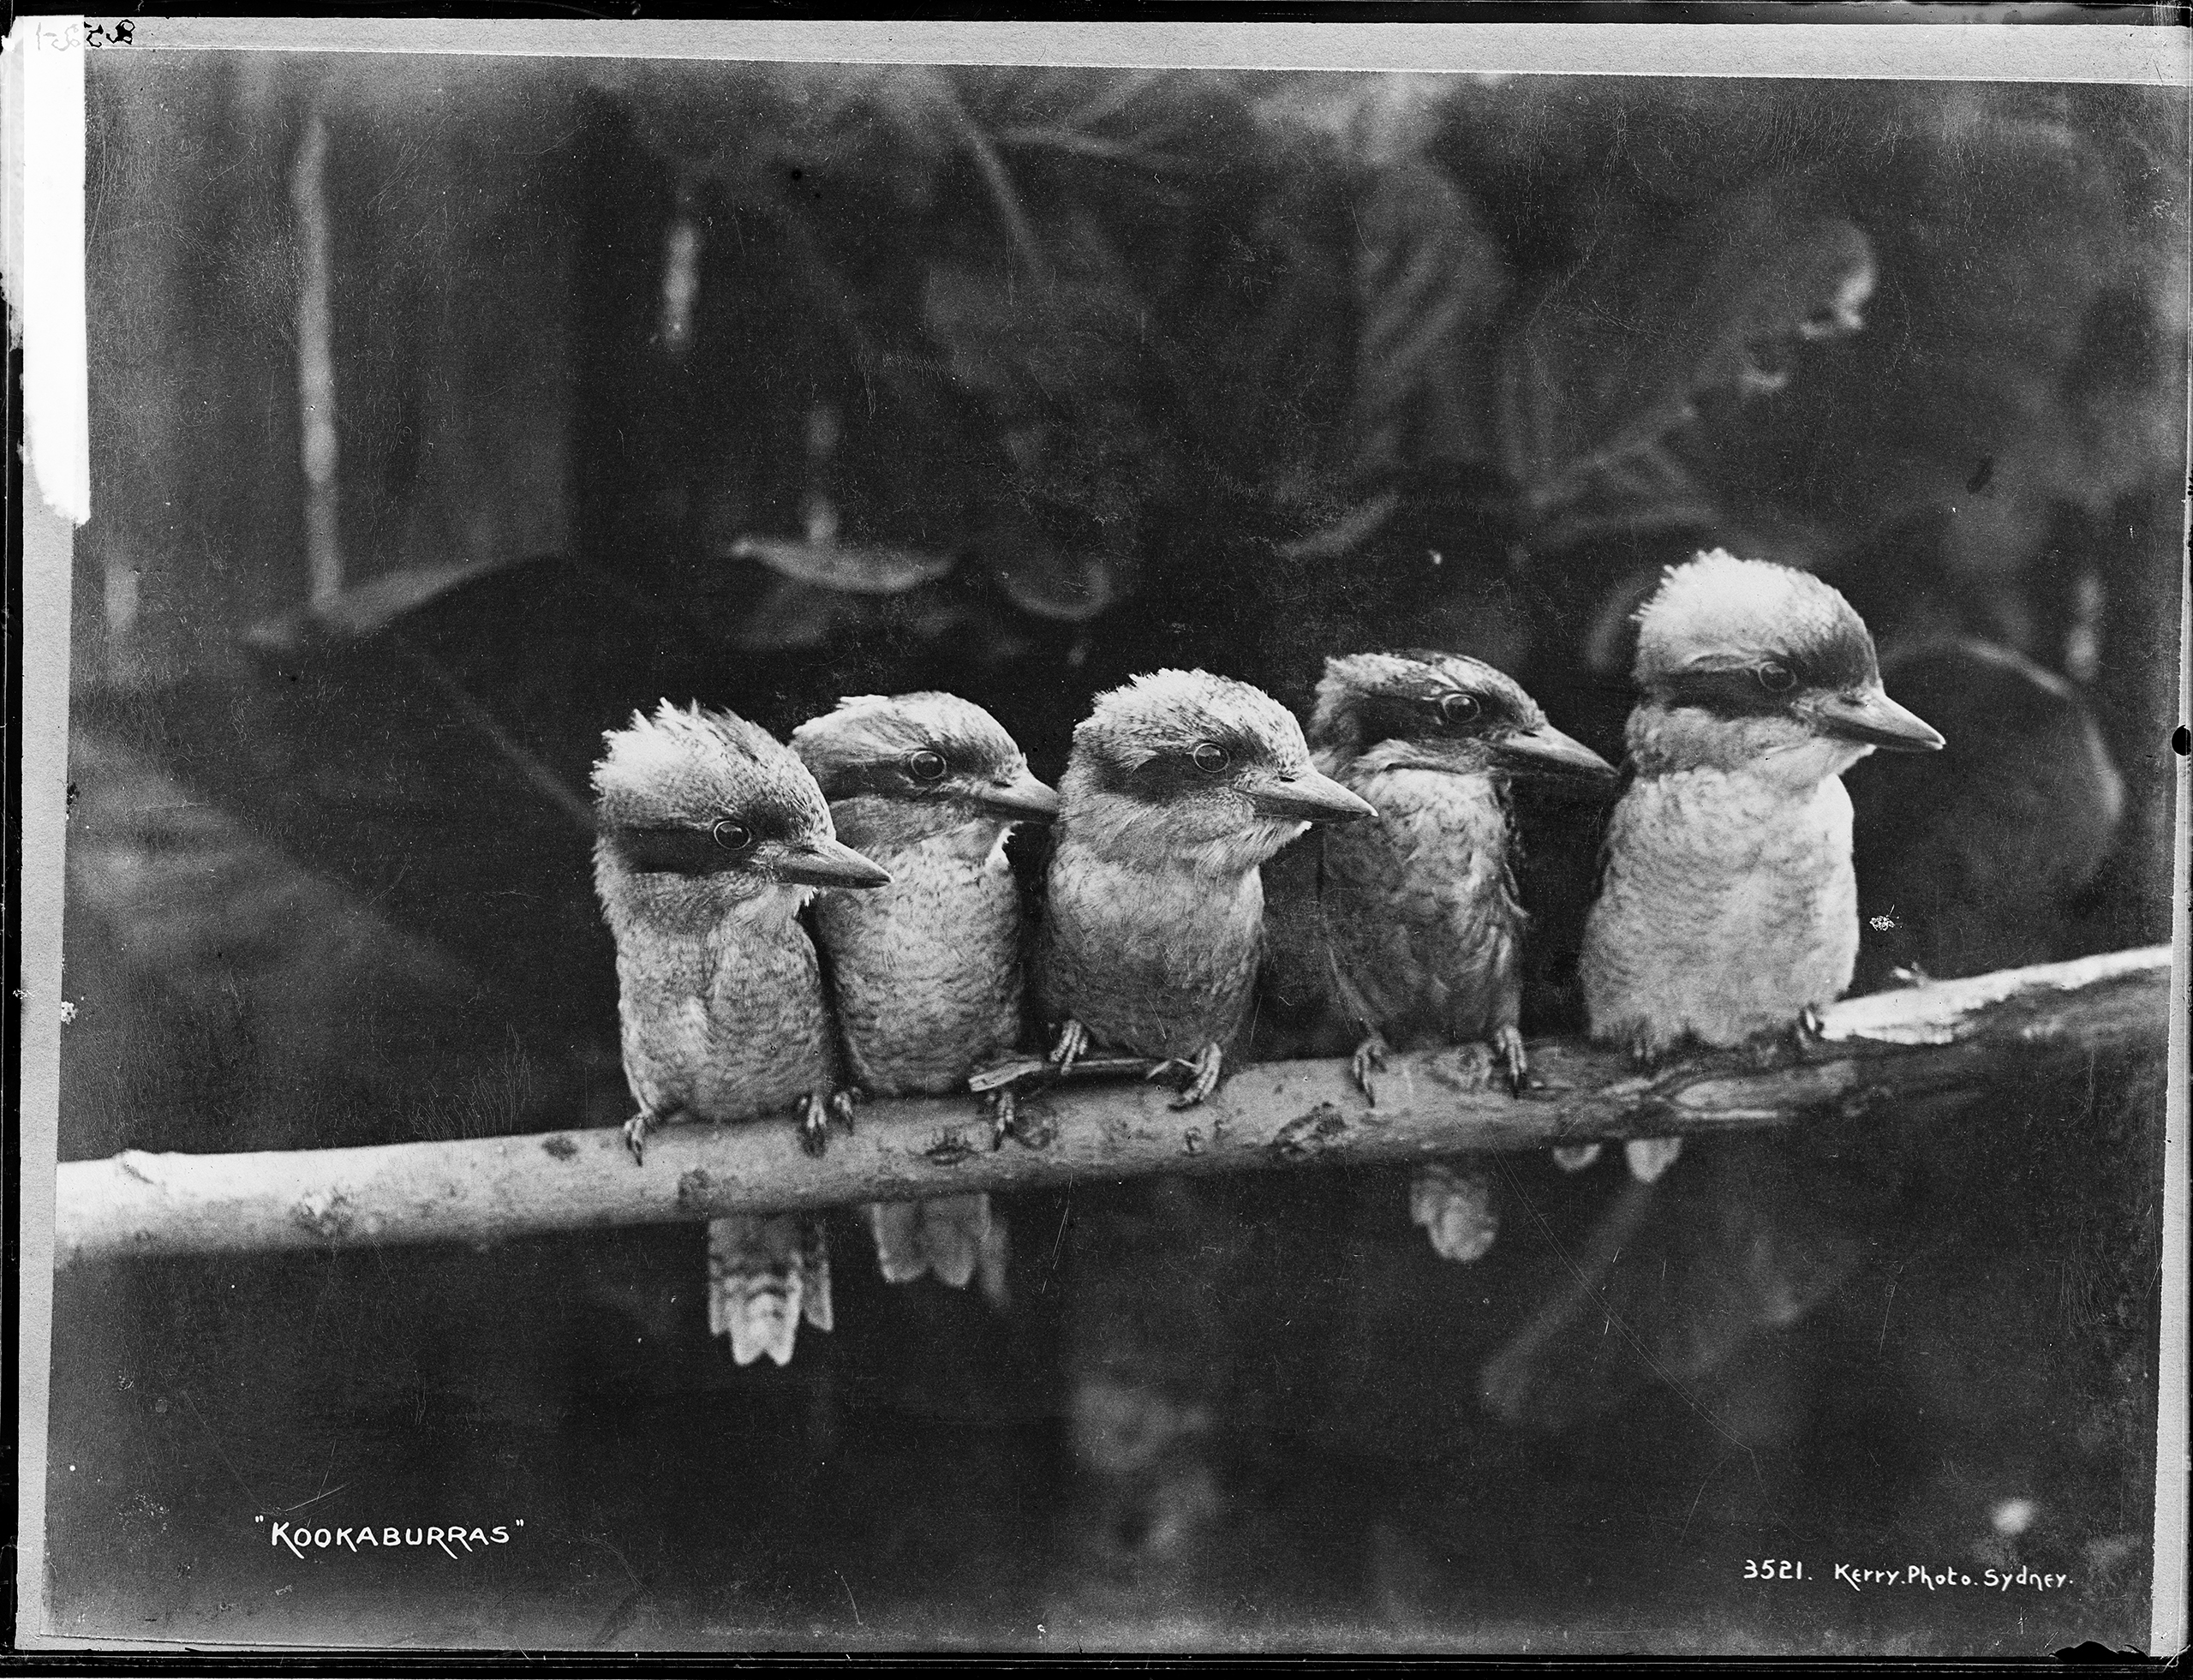 Glass Plate negative entitled 'Kookaburras' by Kerry and Co